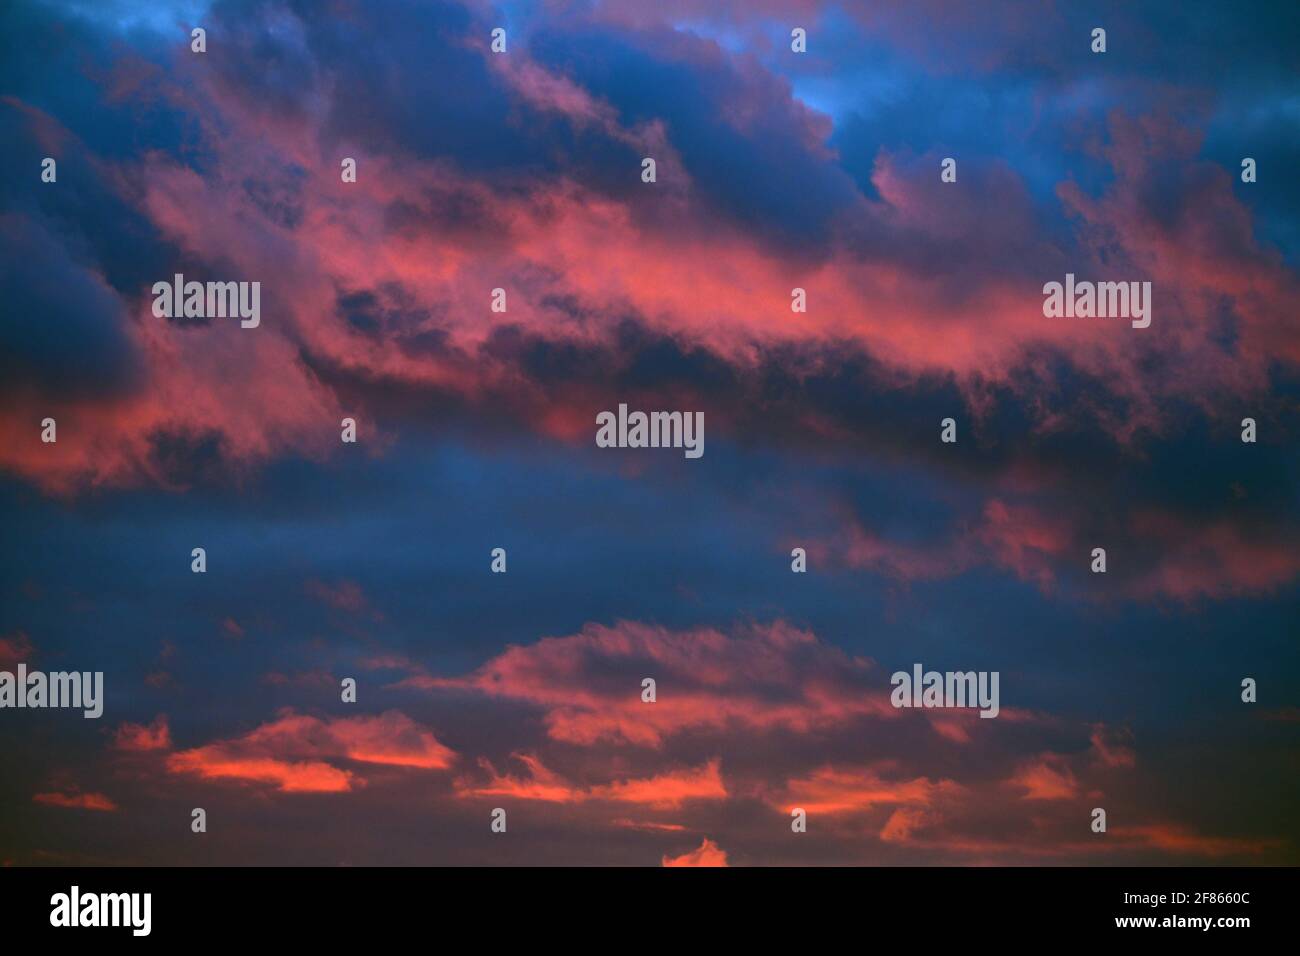 It's a photograph of a colorful and dominant Illinois sky on a winter evening. Stock Photo